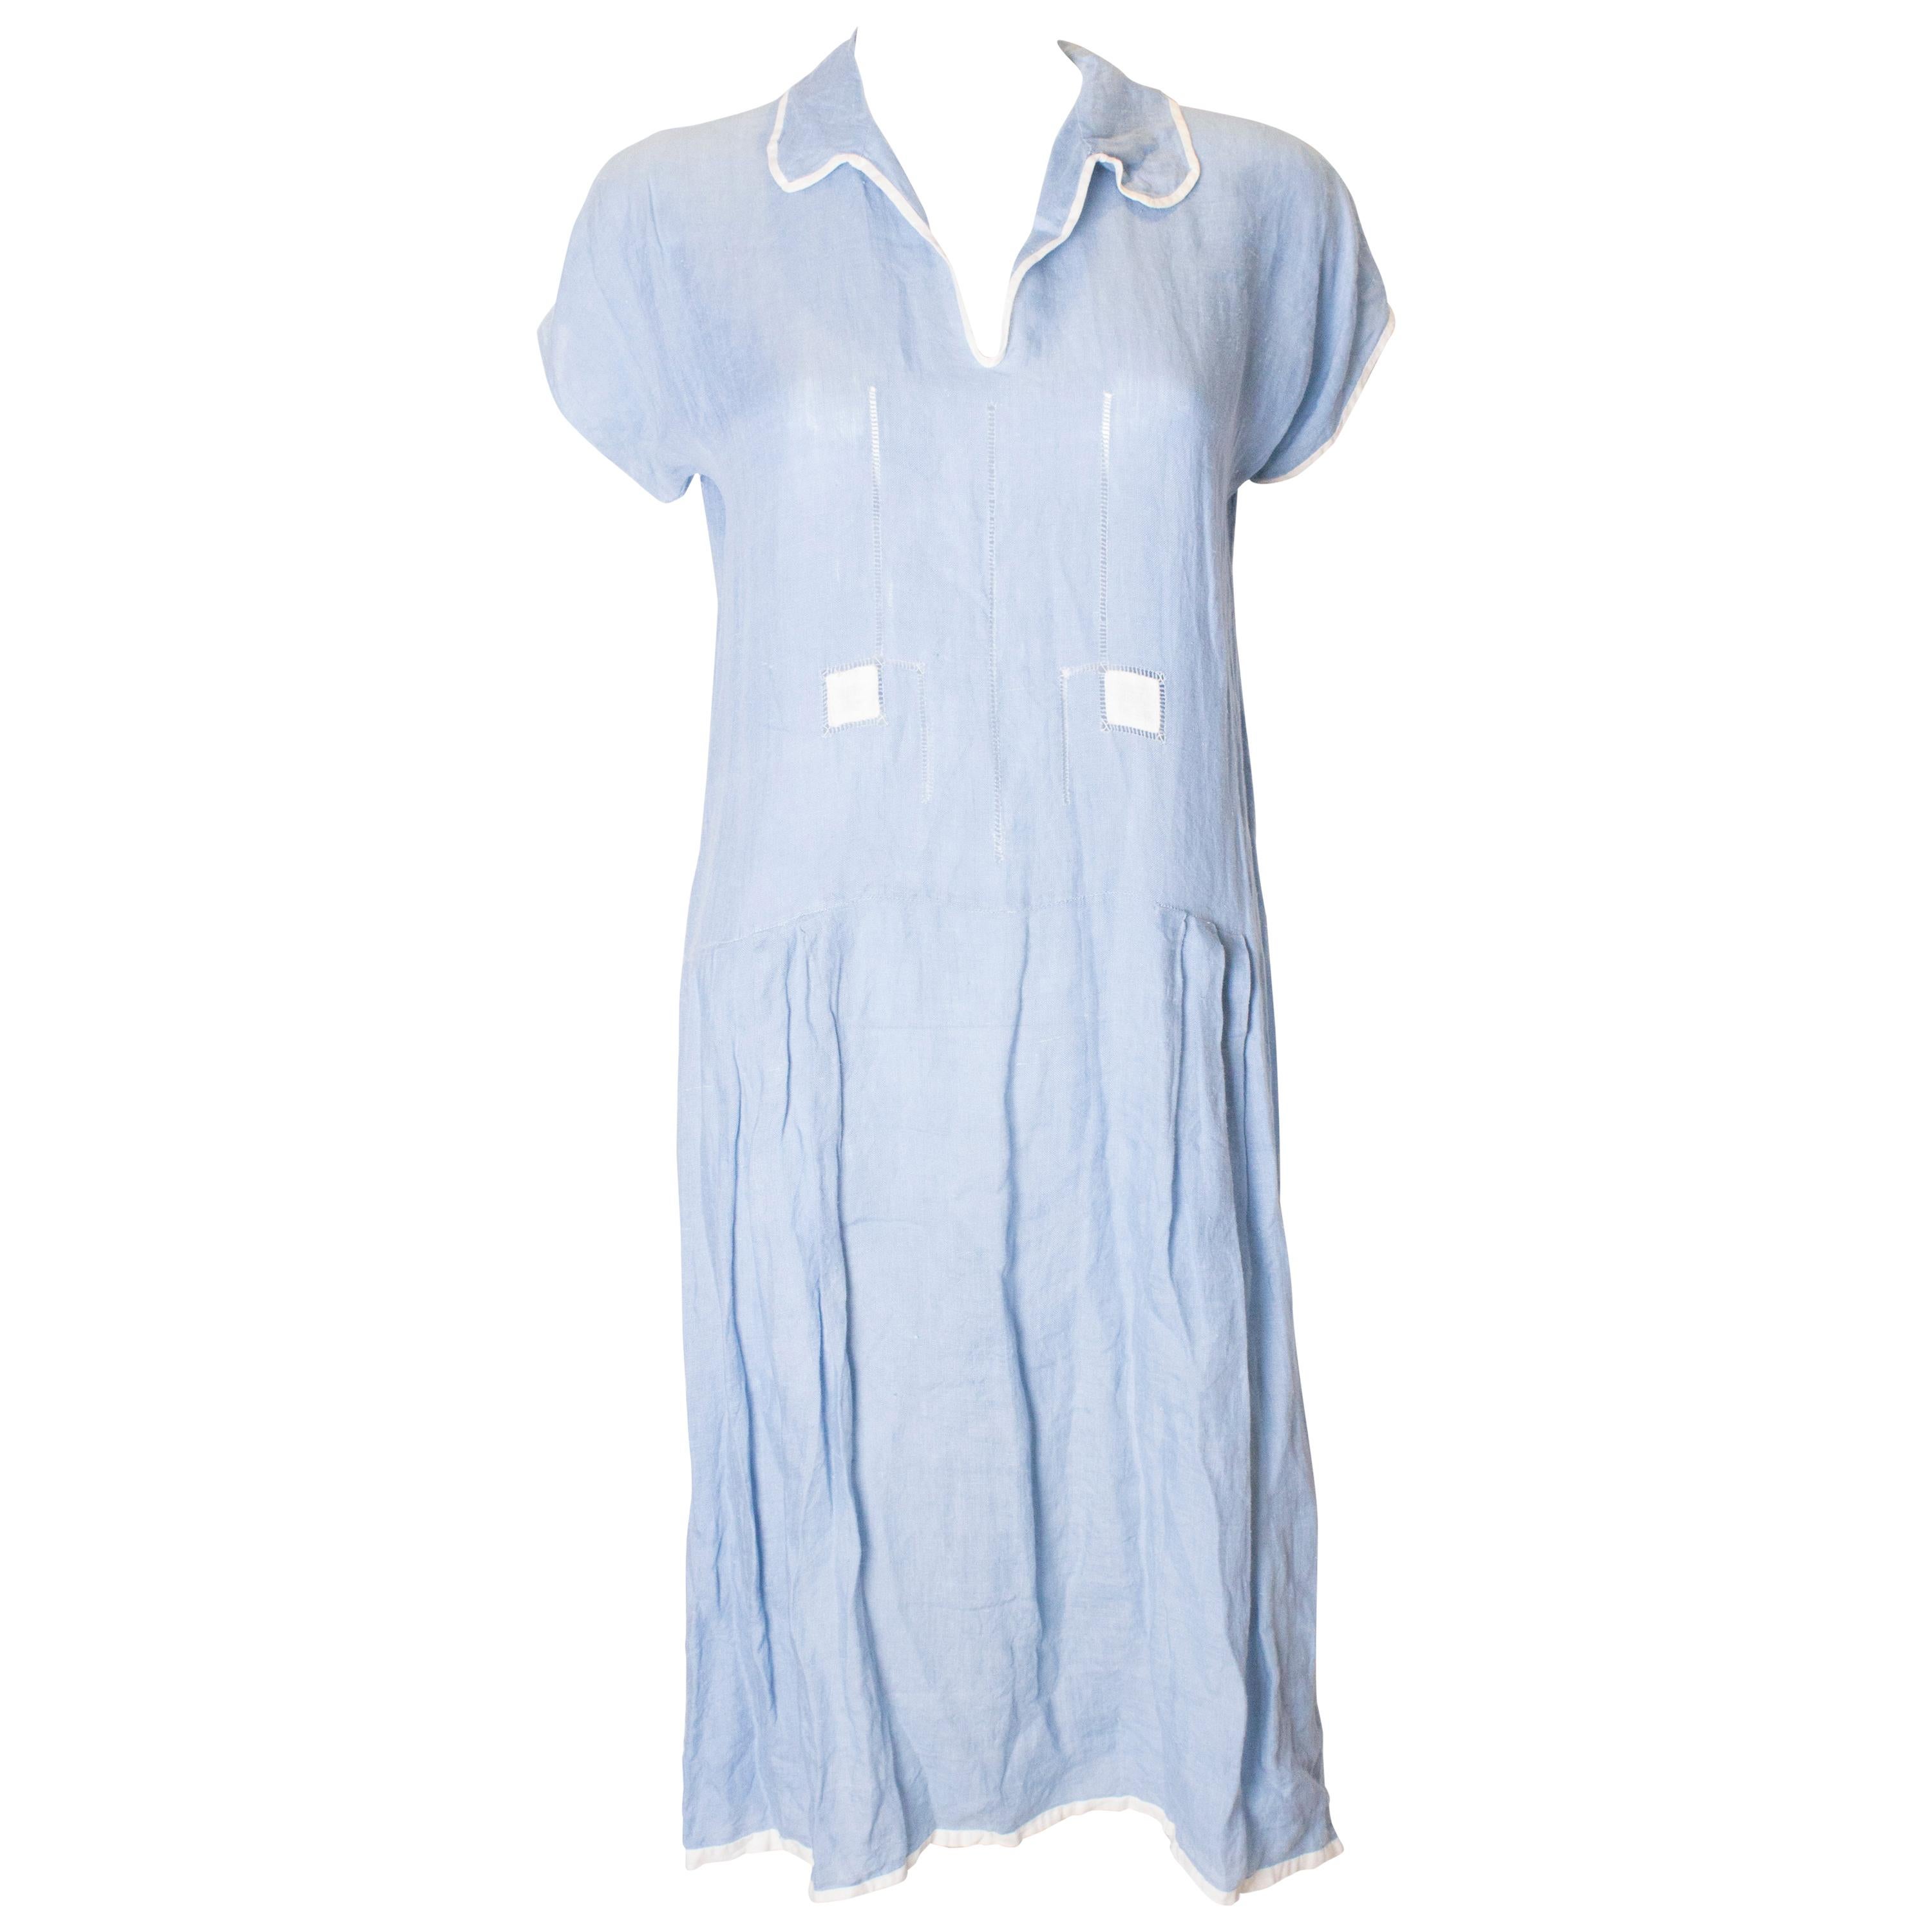 Vintage Sky Blue Linen Dress from the 1920s For Sale